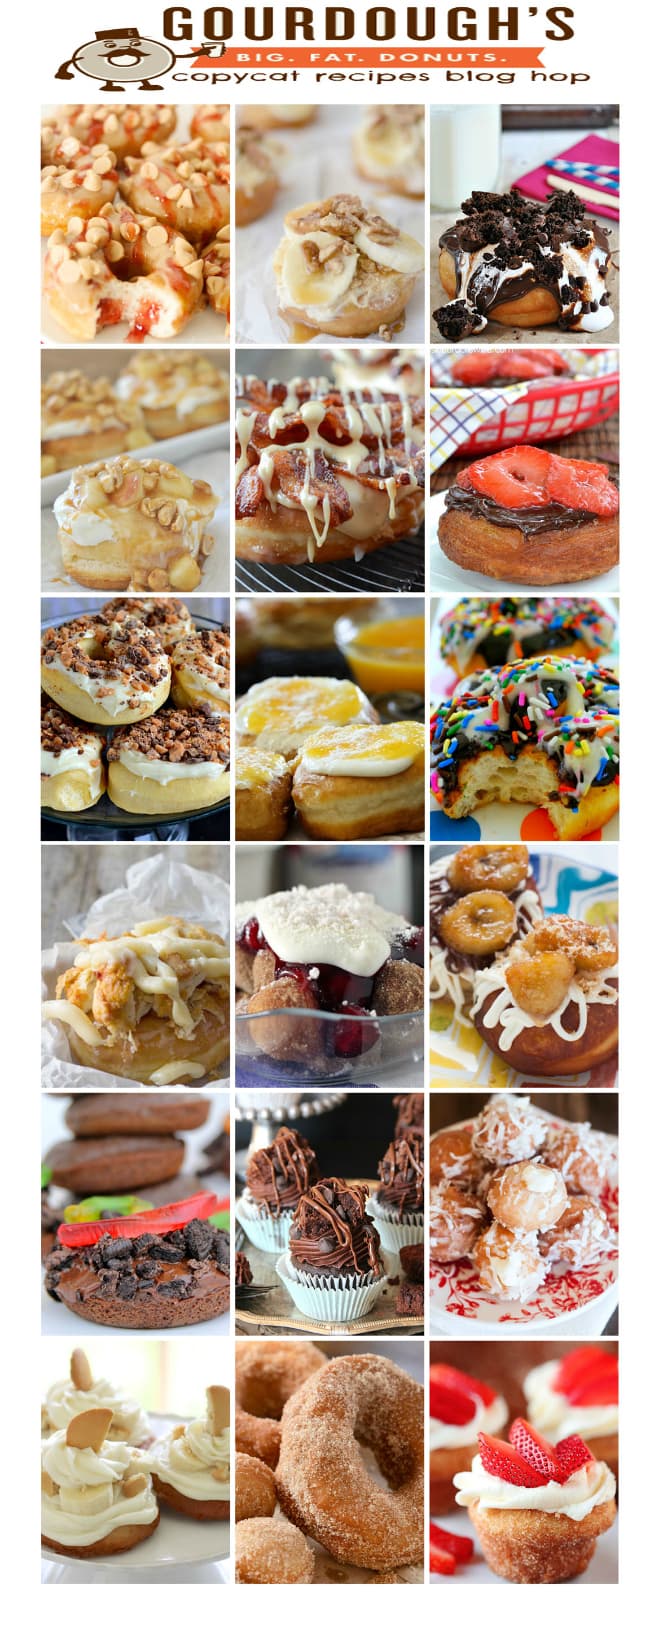 18 Copycat Gourdough's Doughnuts Recipes from your favorite bloggers!